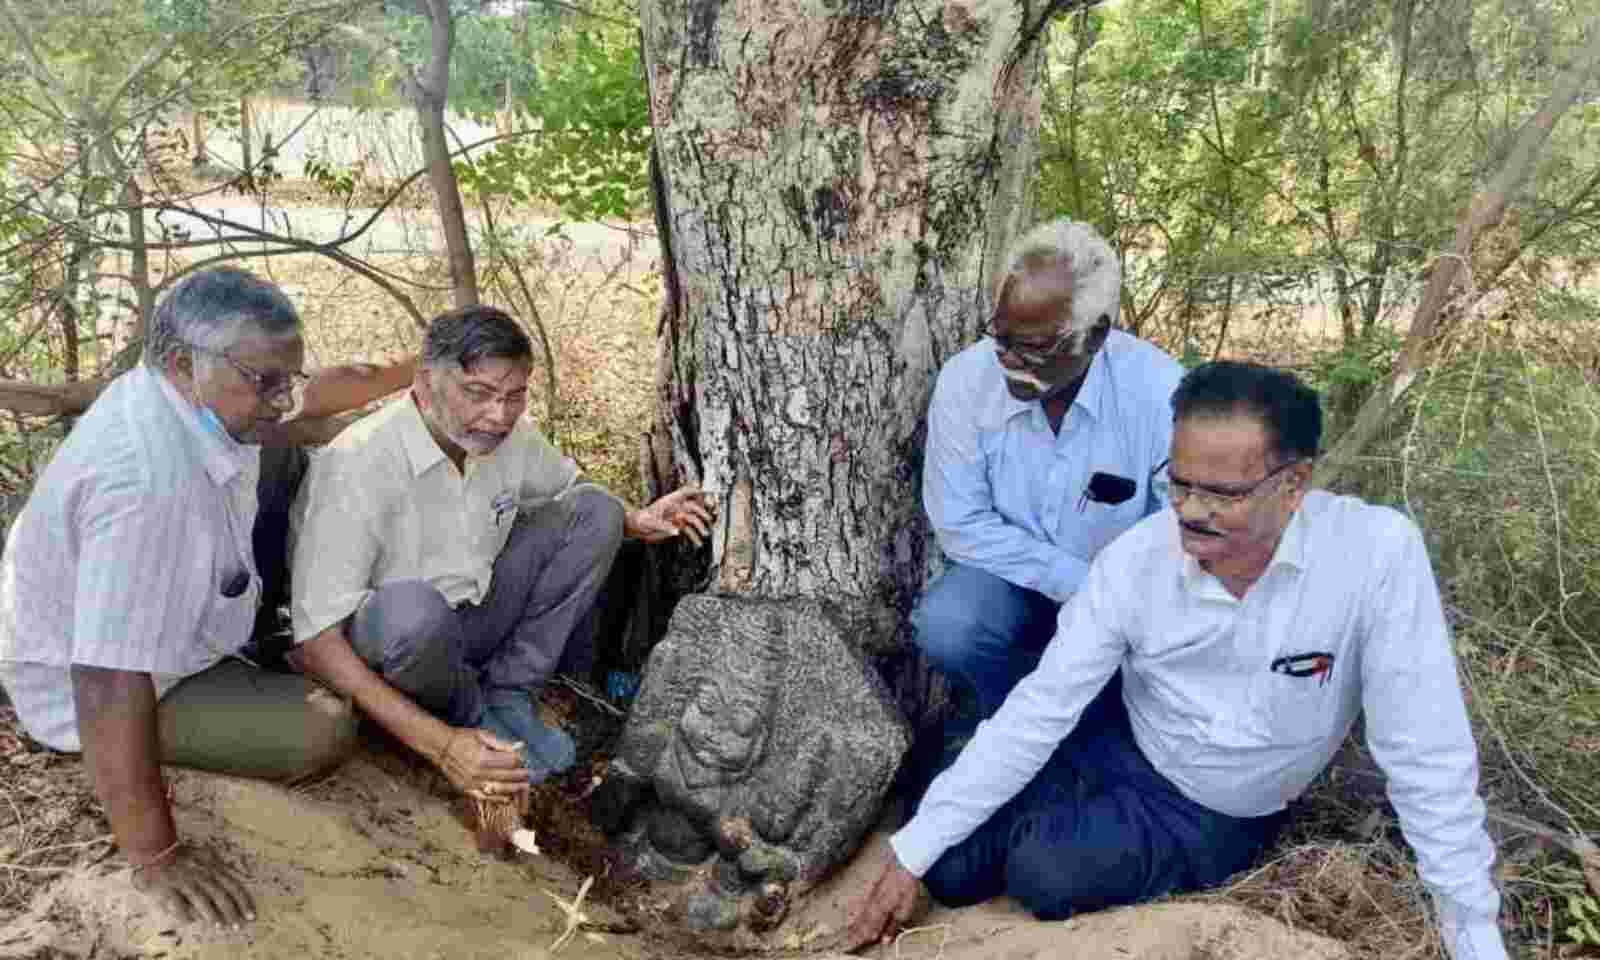 1,000-Year-Old Jaina Sculptures Discovered near Hyderabad, Telangana: Largest 'Dwarapala' Sculpture Found in Siddipet_50.1